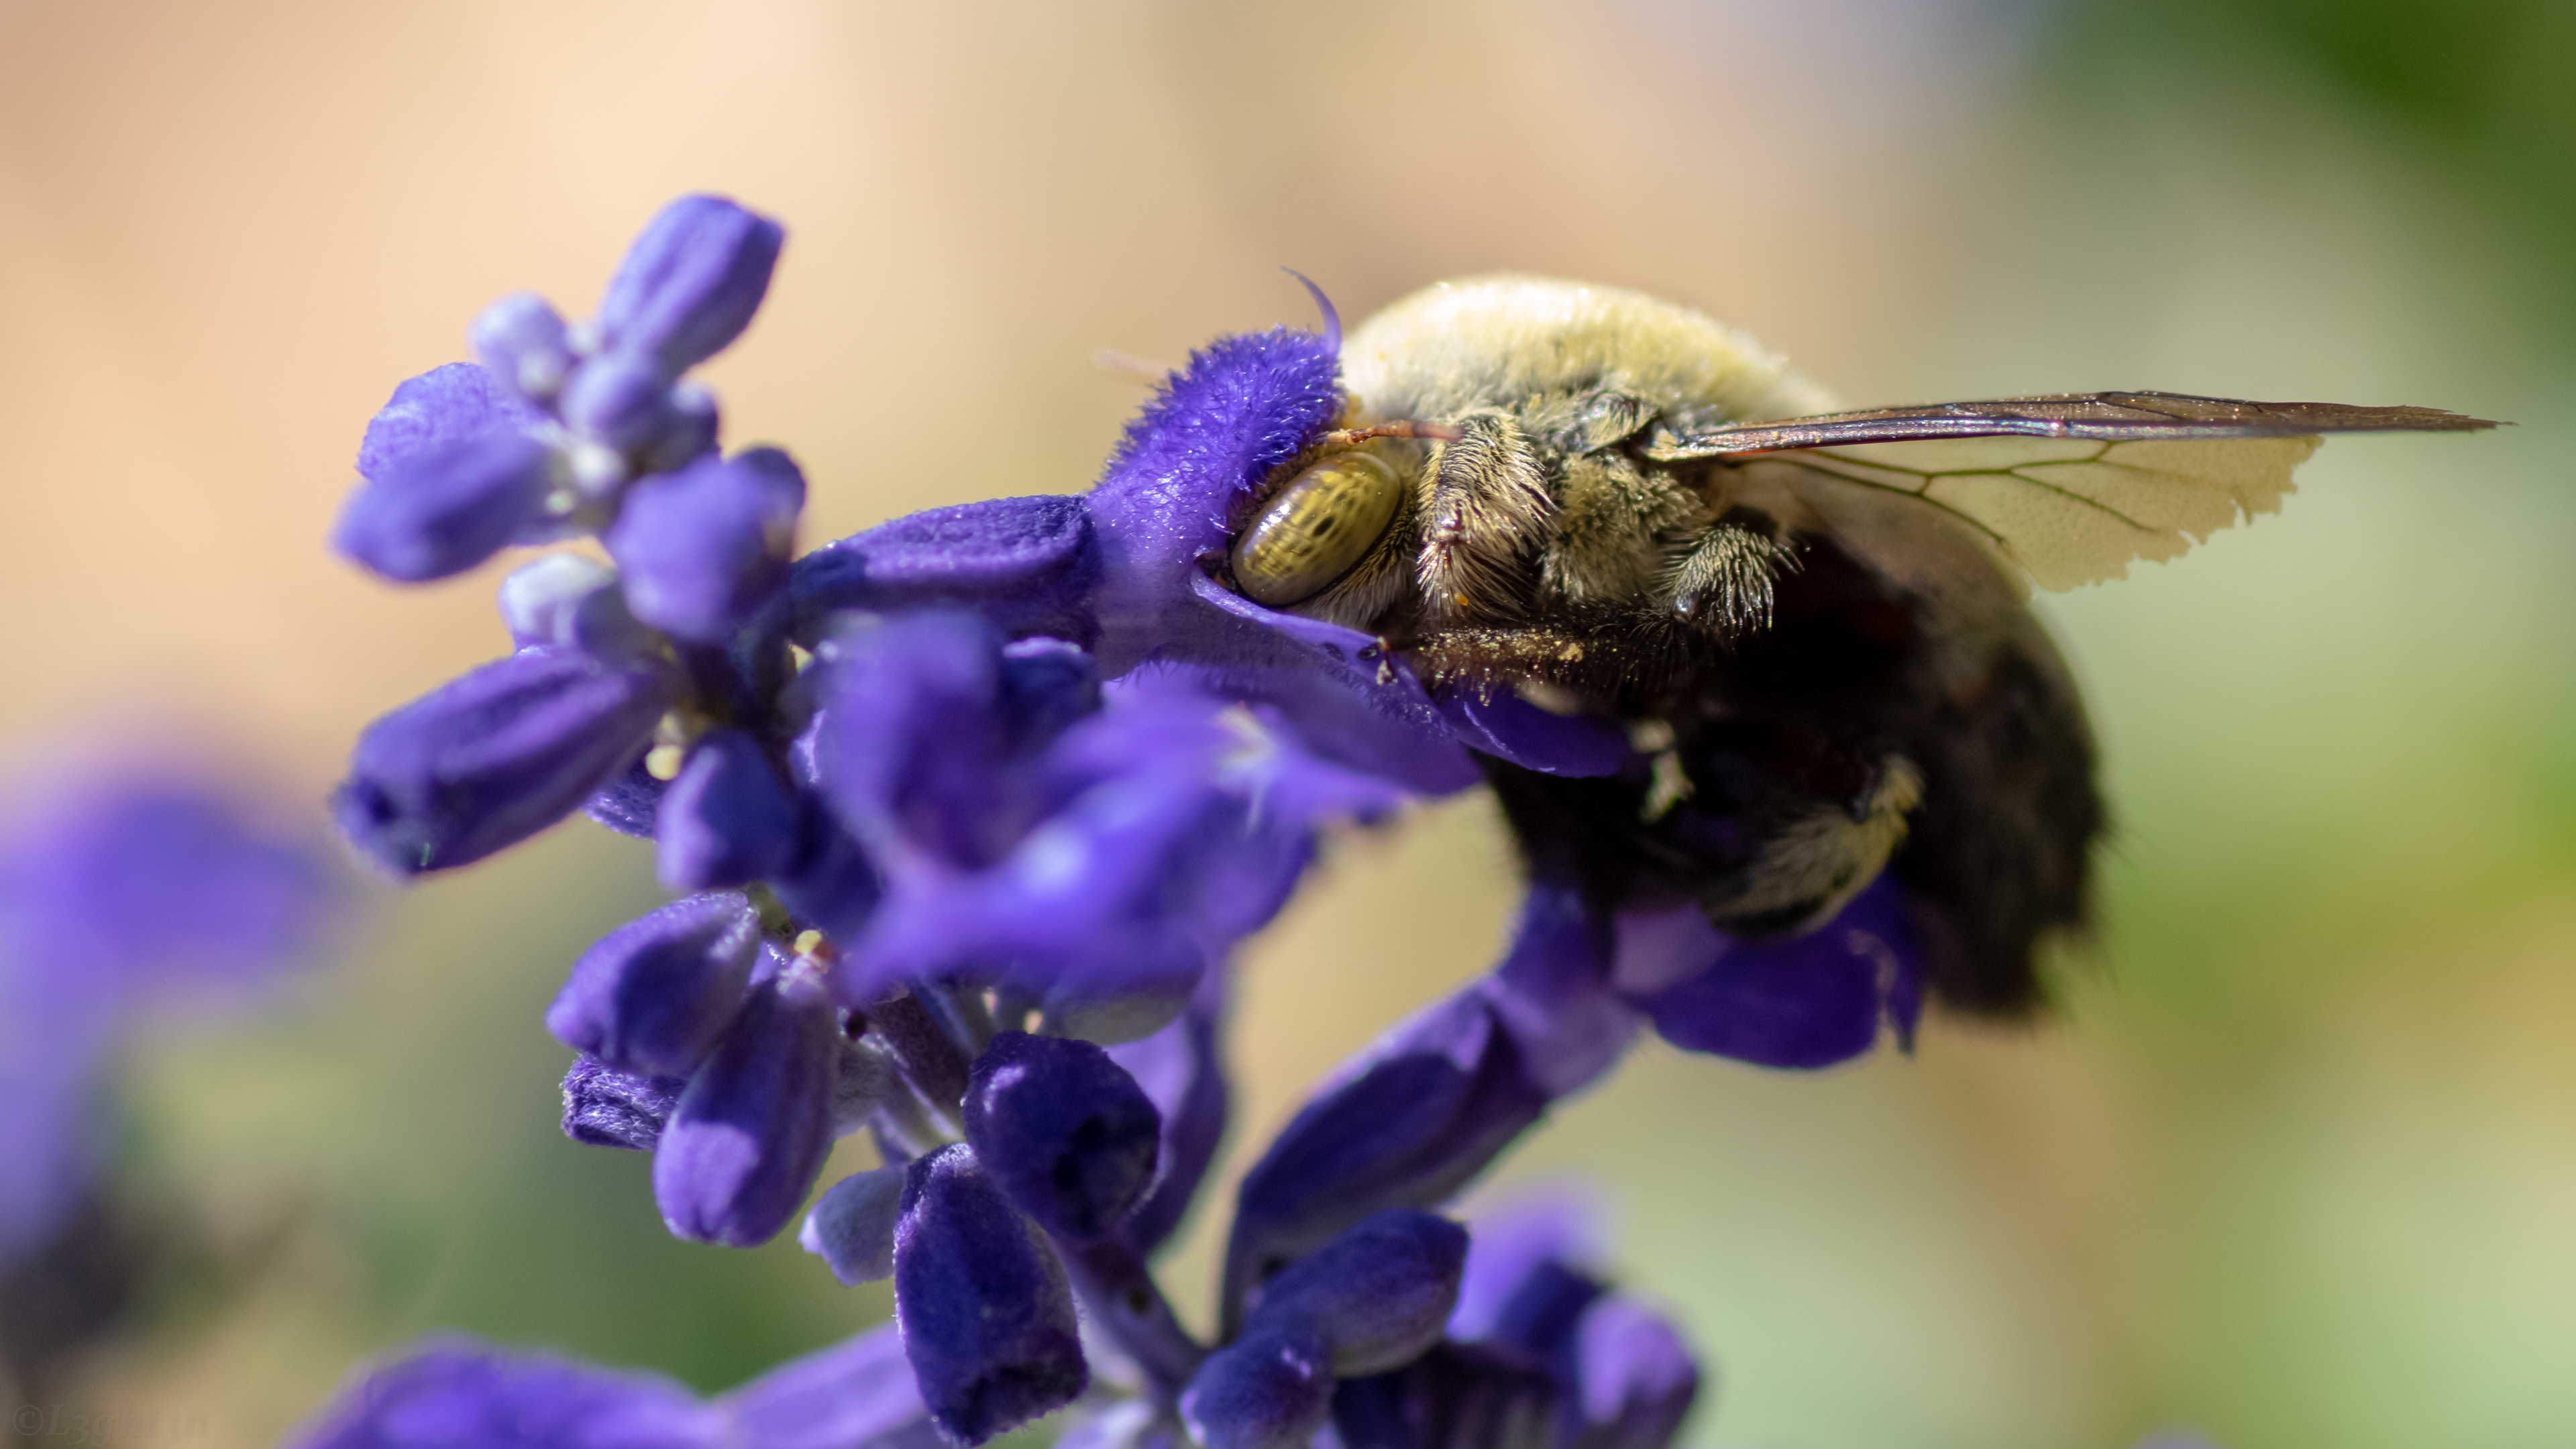 General 3840x2160 photography animals flowers insect plants bumblebees blurred blurry background closeup macro